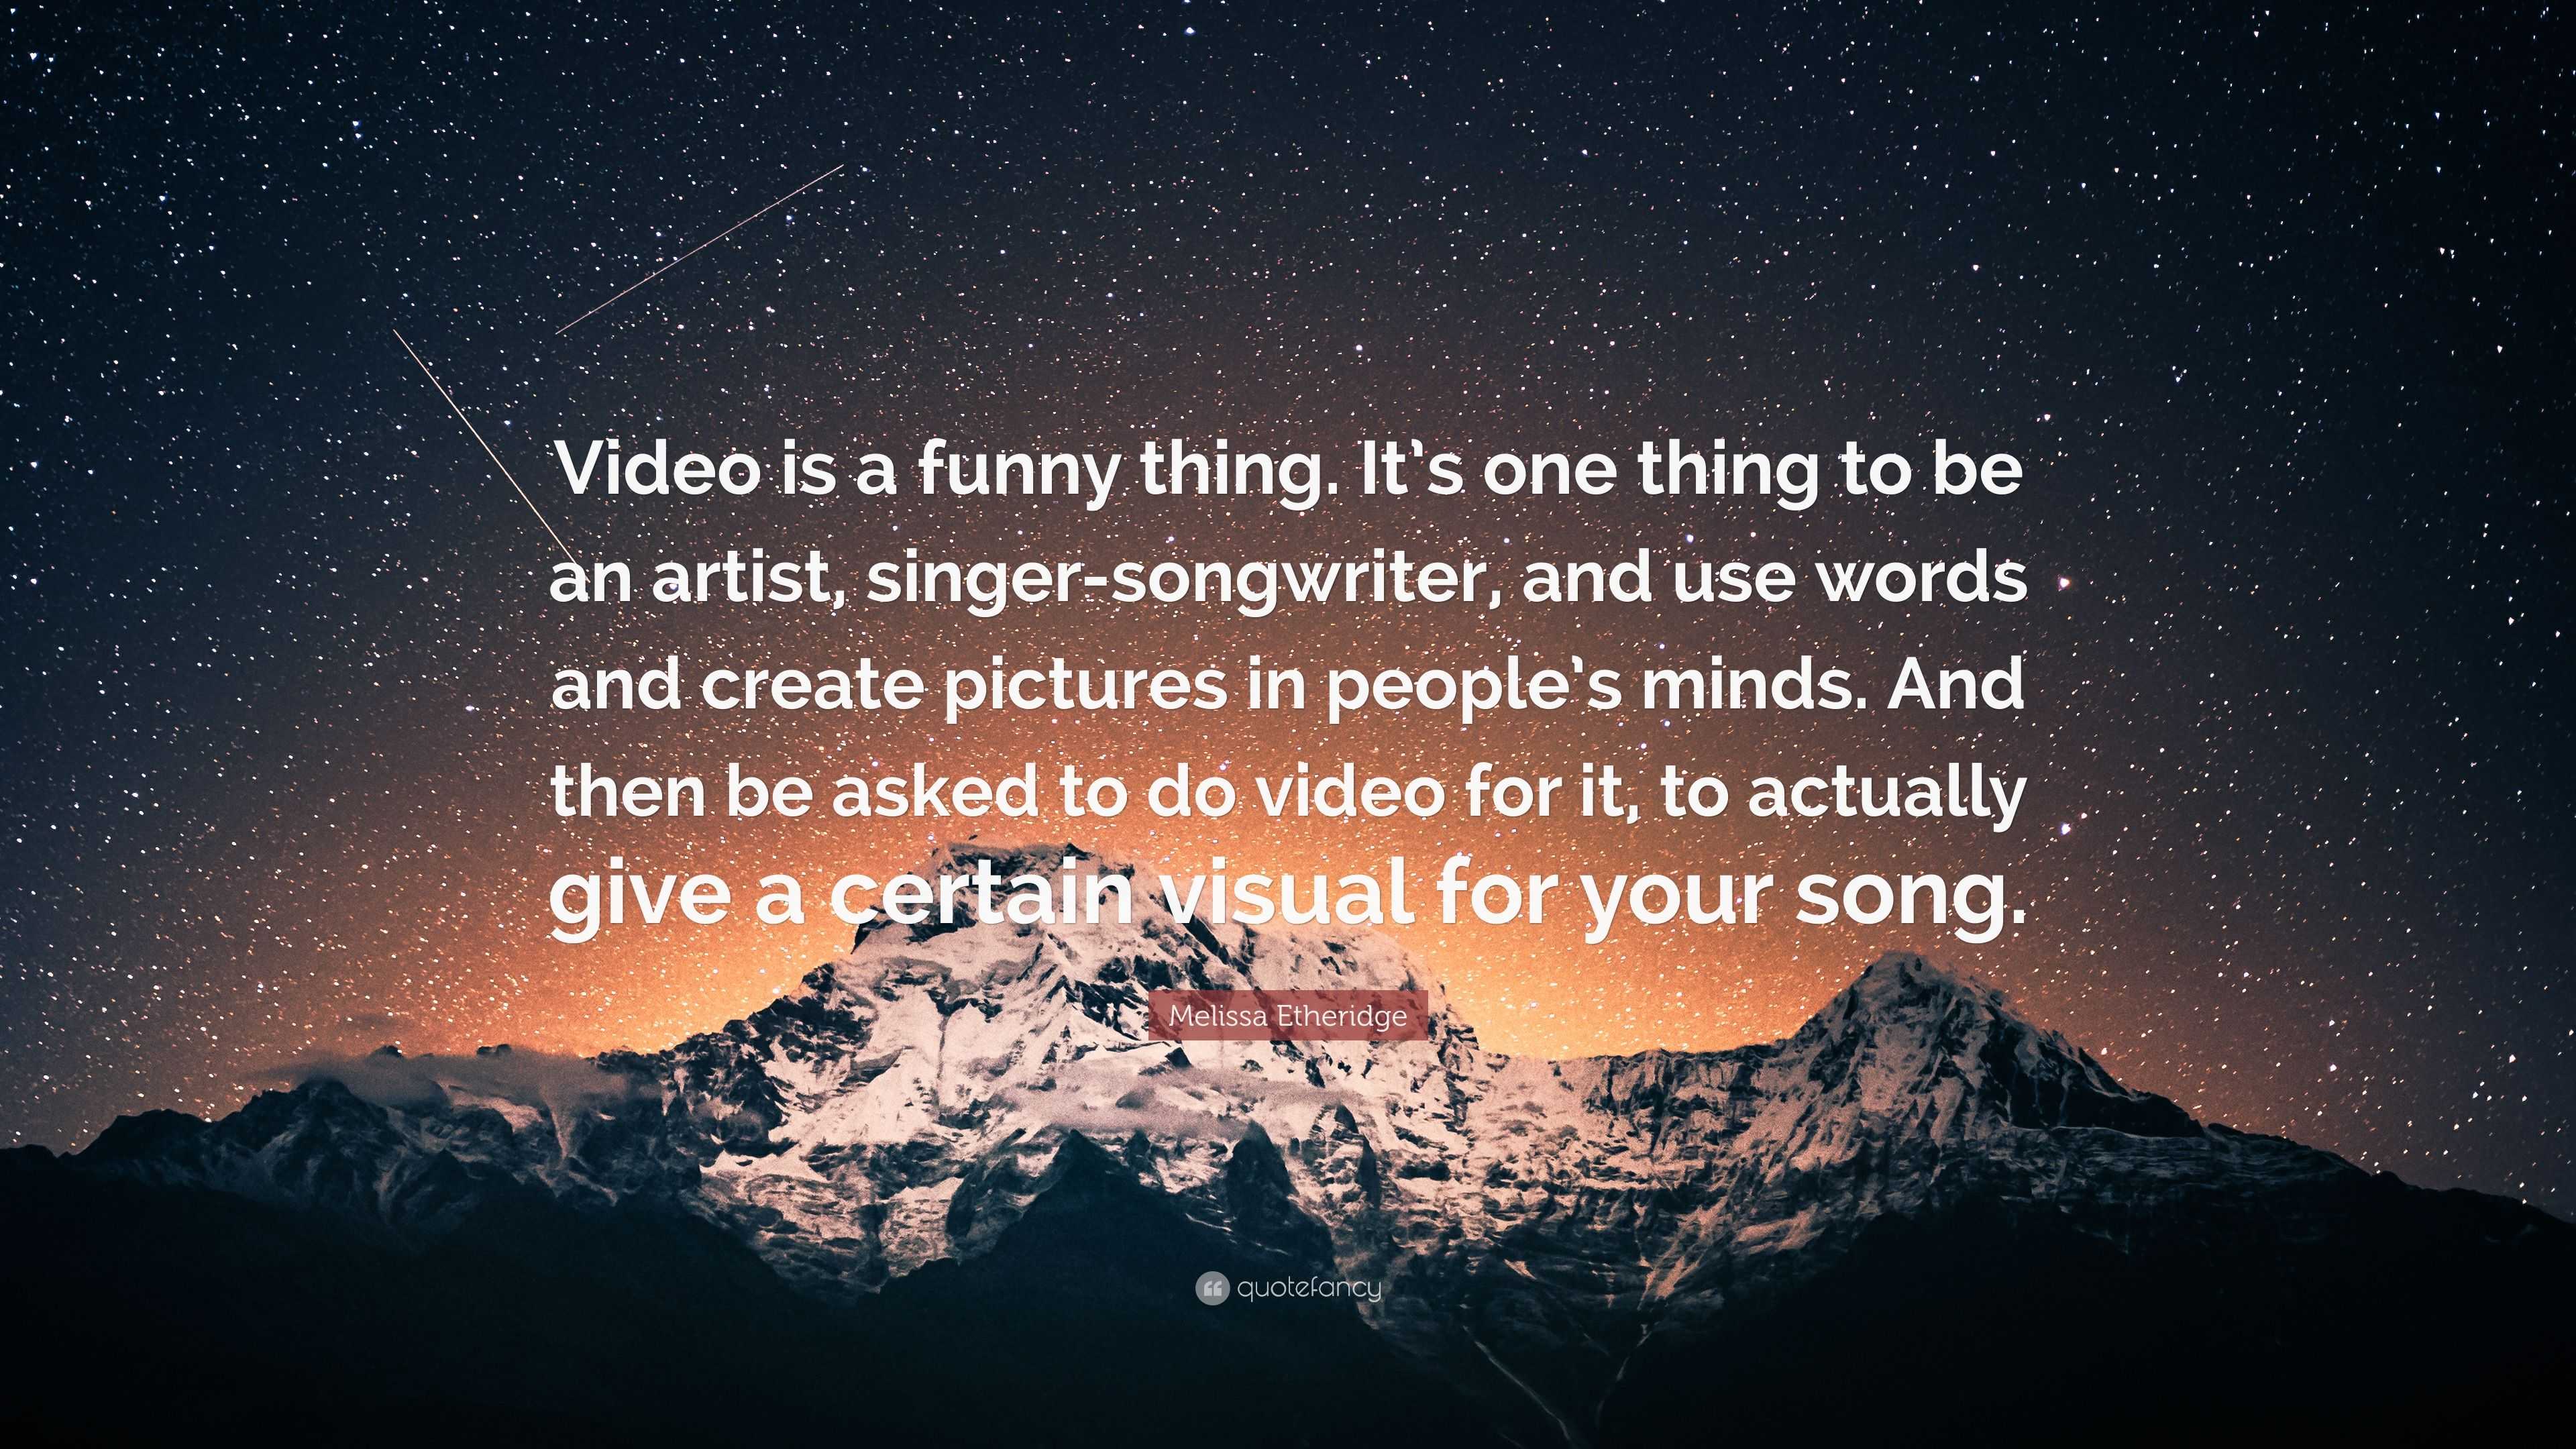 Melissa Etheridge Quote: “Video is a funny thing. It's one thing to be an  artist, singer-songwriter, and use words and create pictures in people's...”